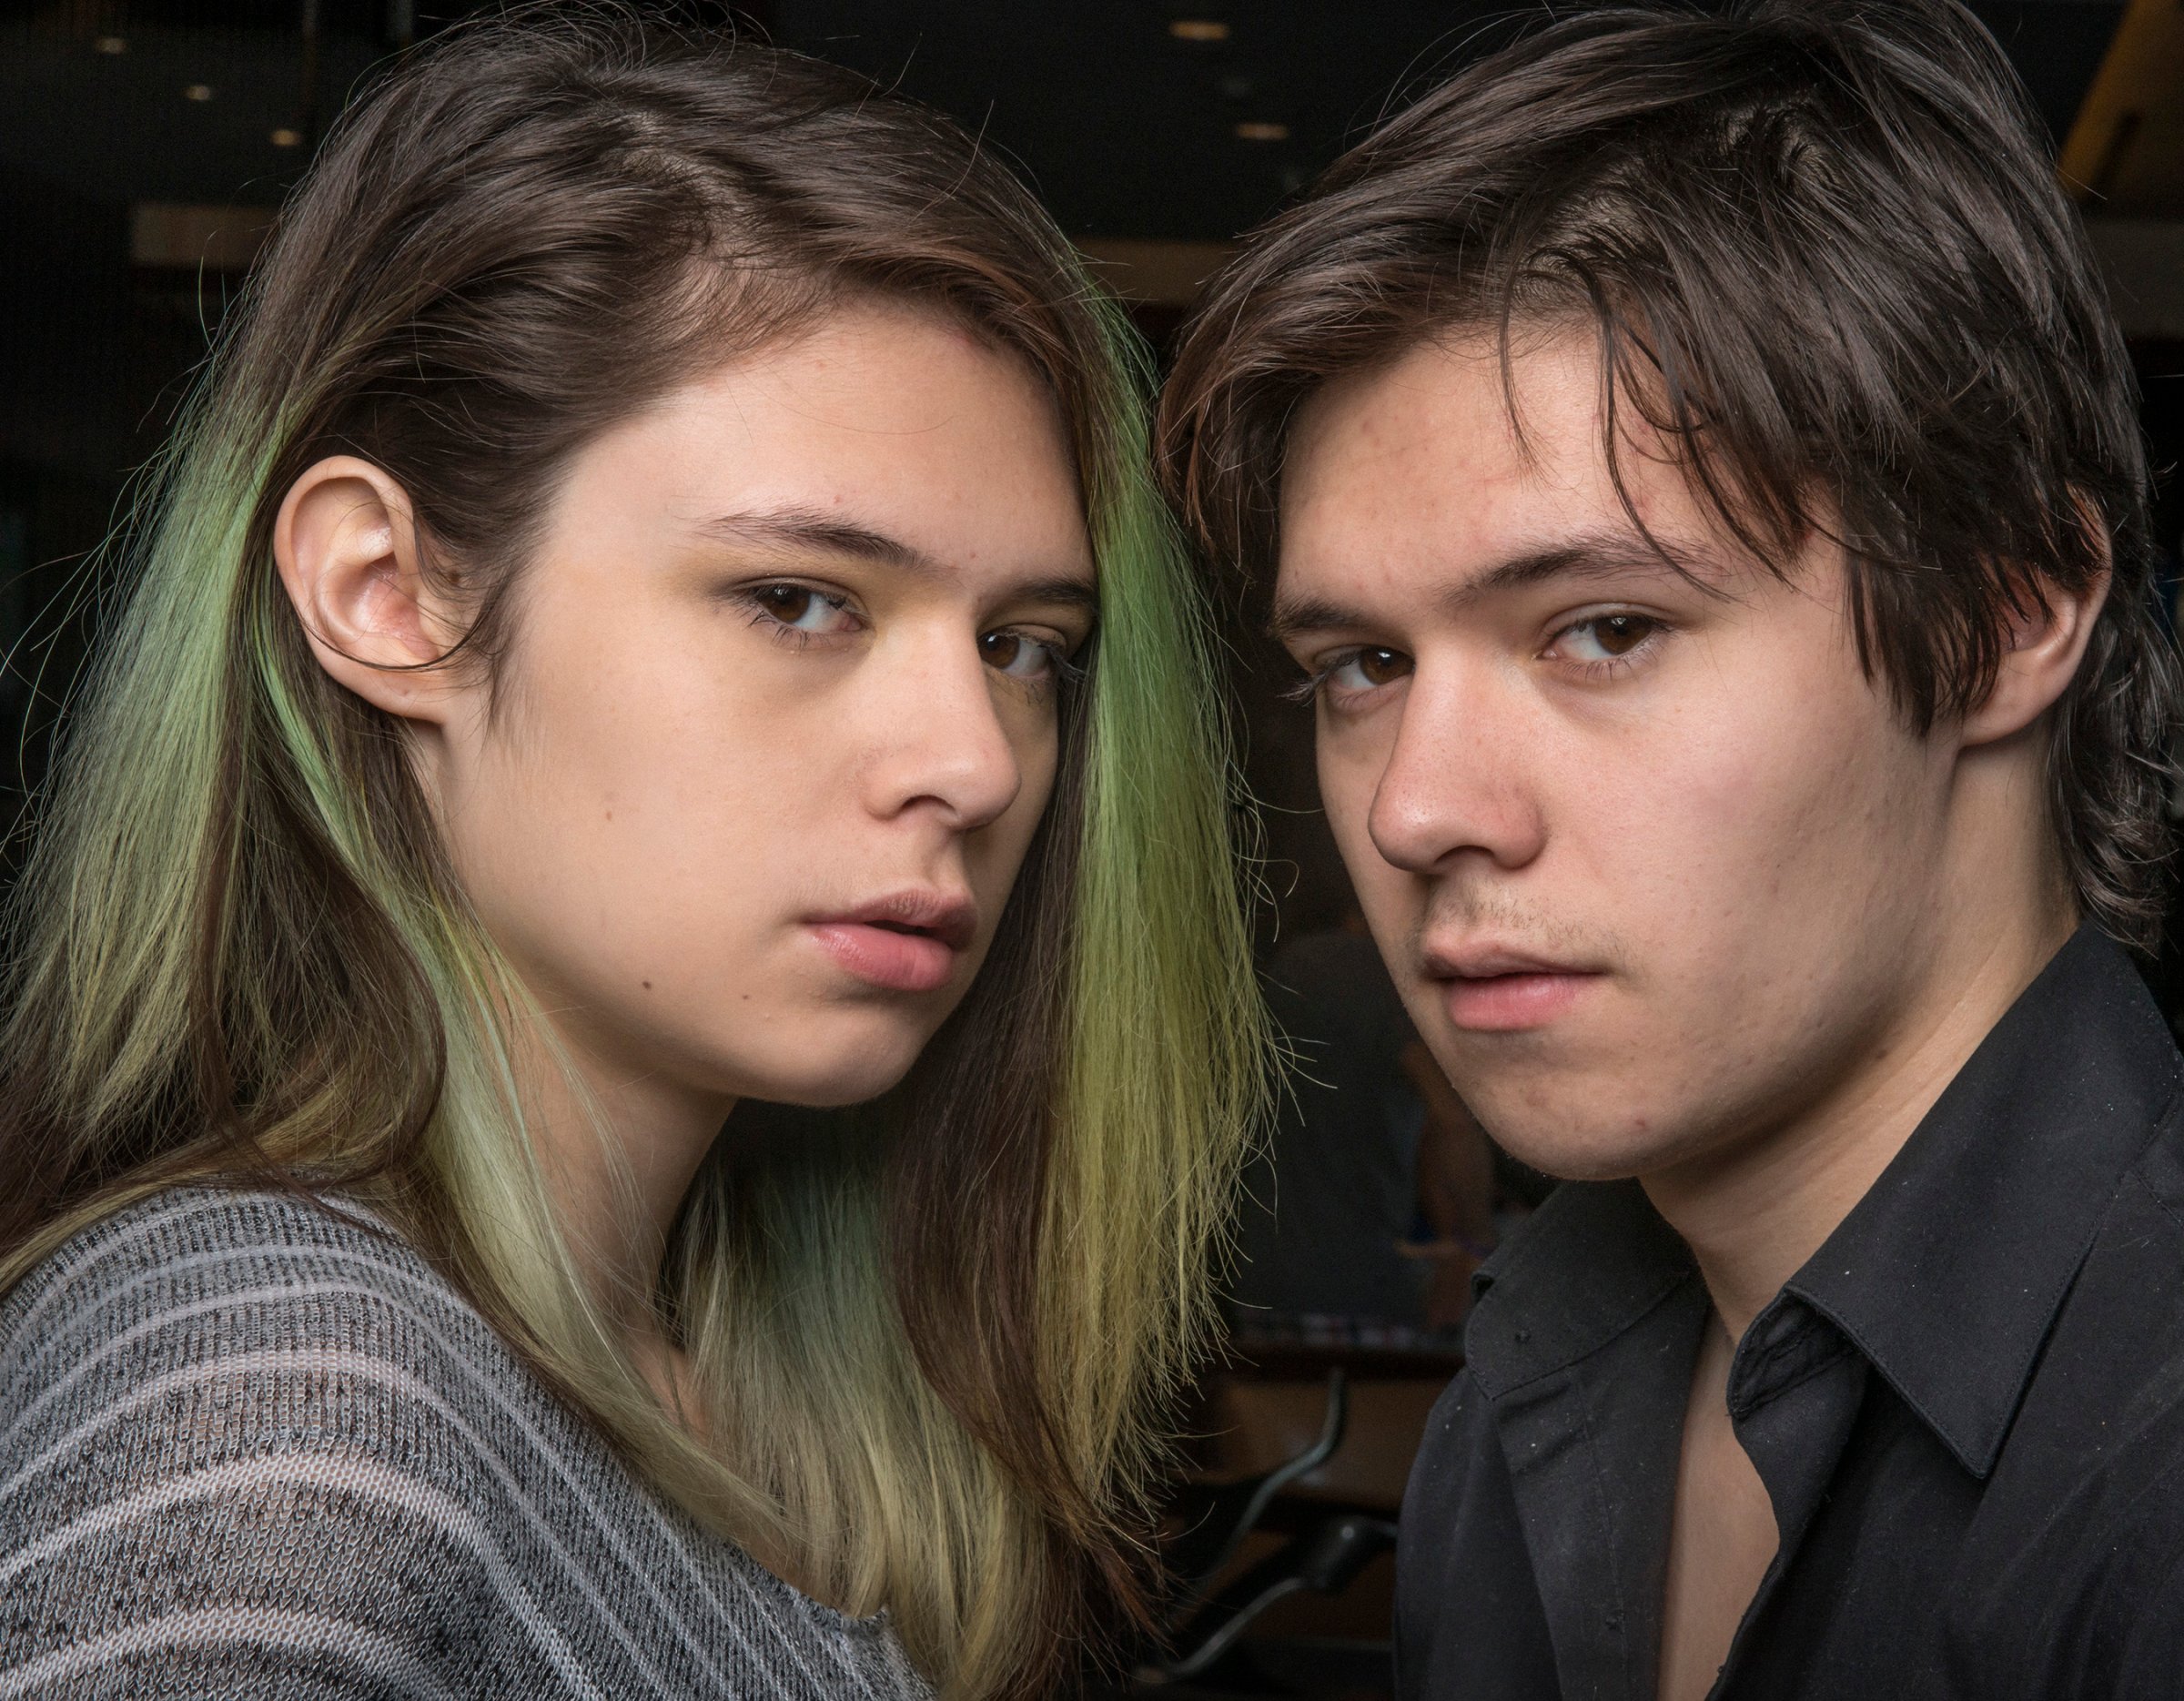 Jonas, right, and Nicole Maines, both 18, in Denver, CO, on Oct. 10, 2015.